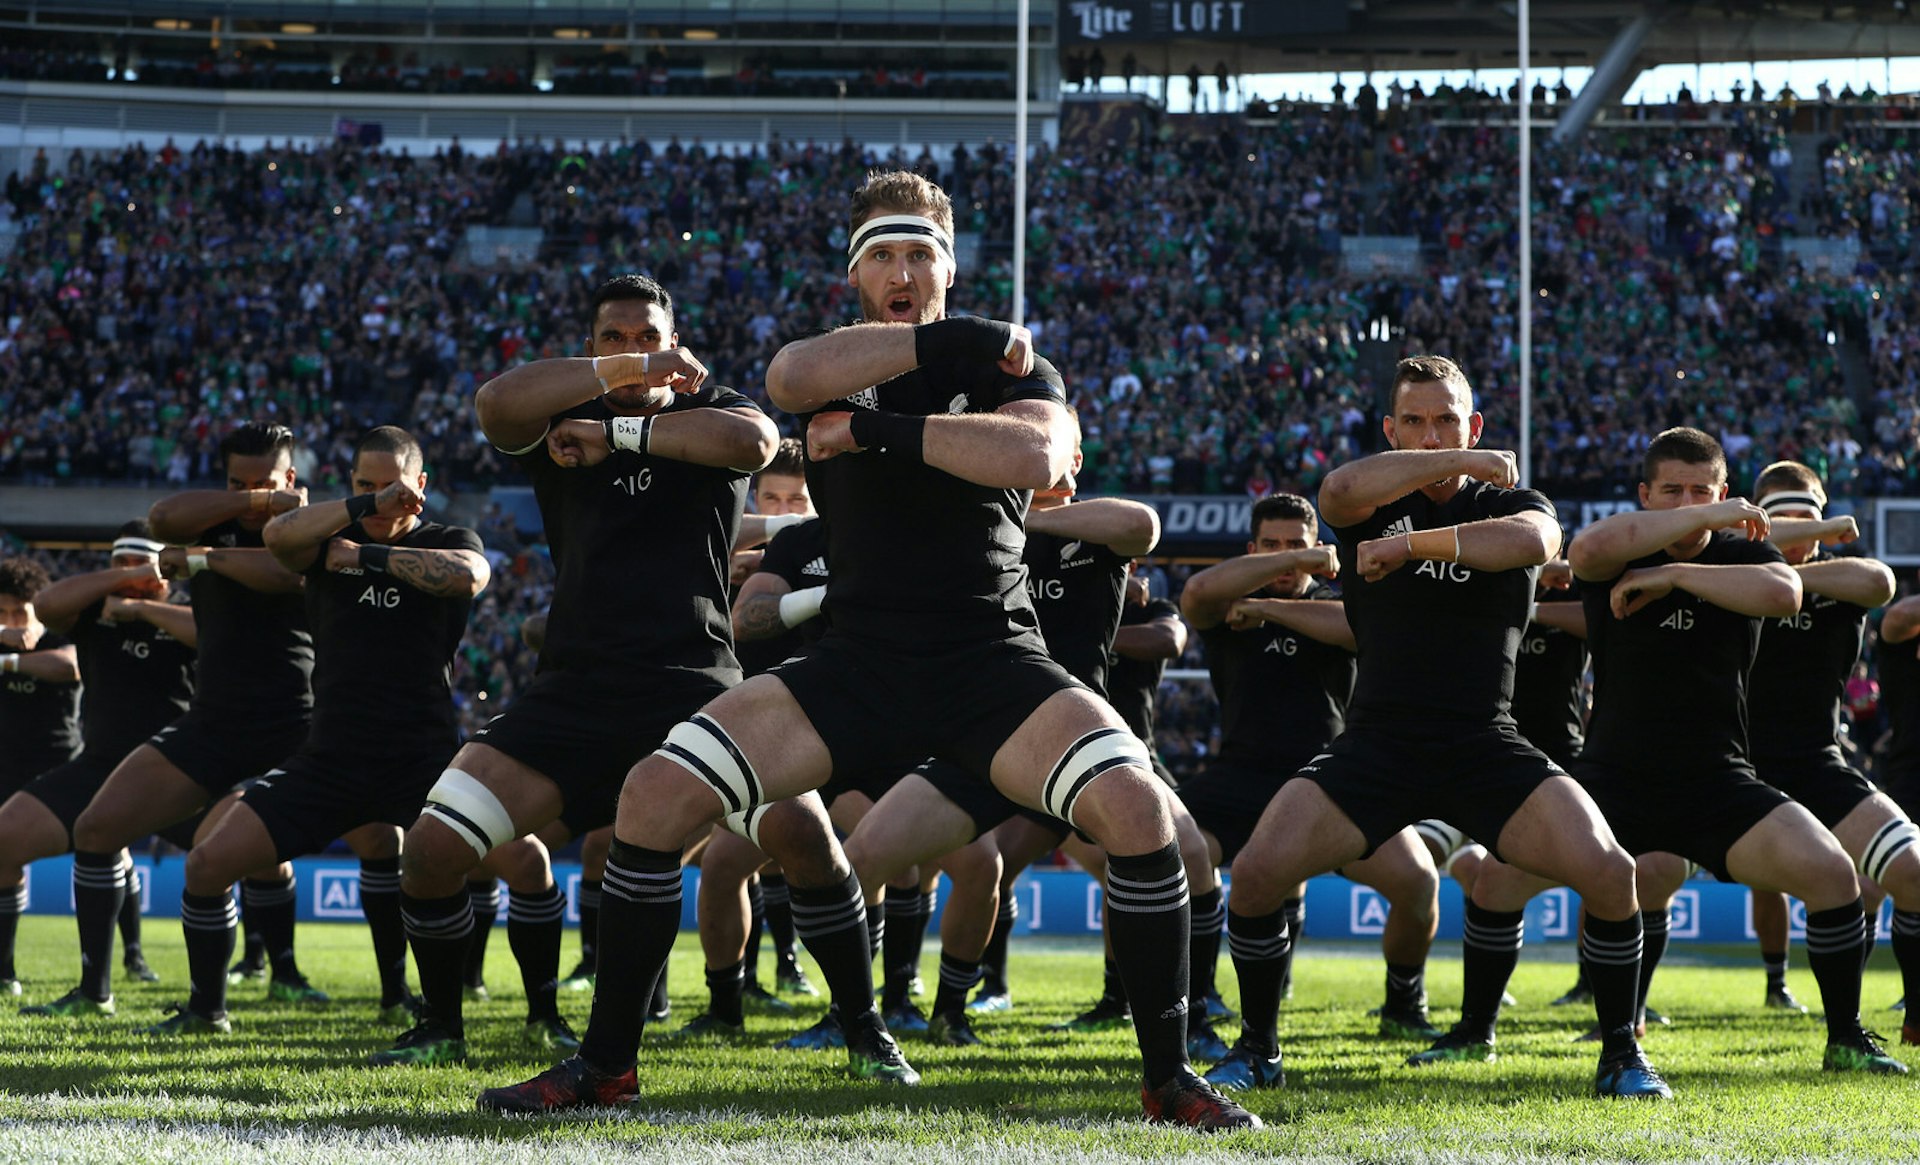 Kieran Reid of New Zealand leads the Haka prior to kickoff during the international match with Ireland in November 2016 © Phil Walter / Getty Images